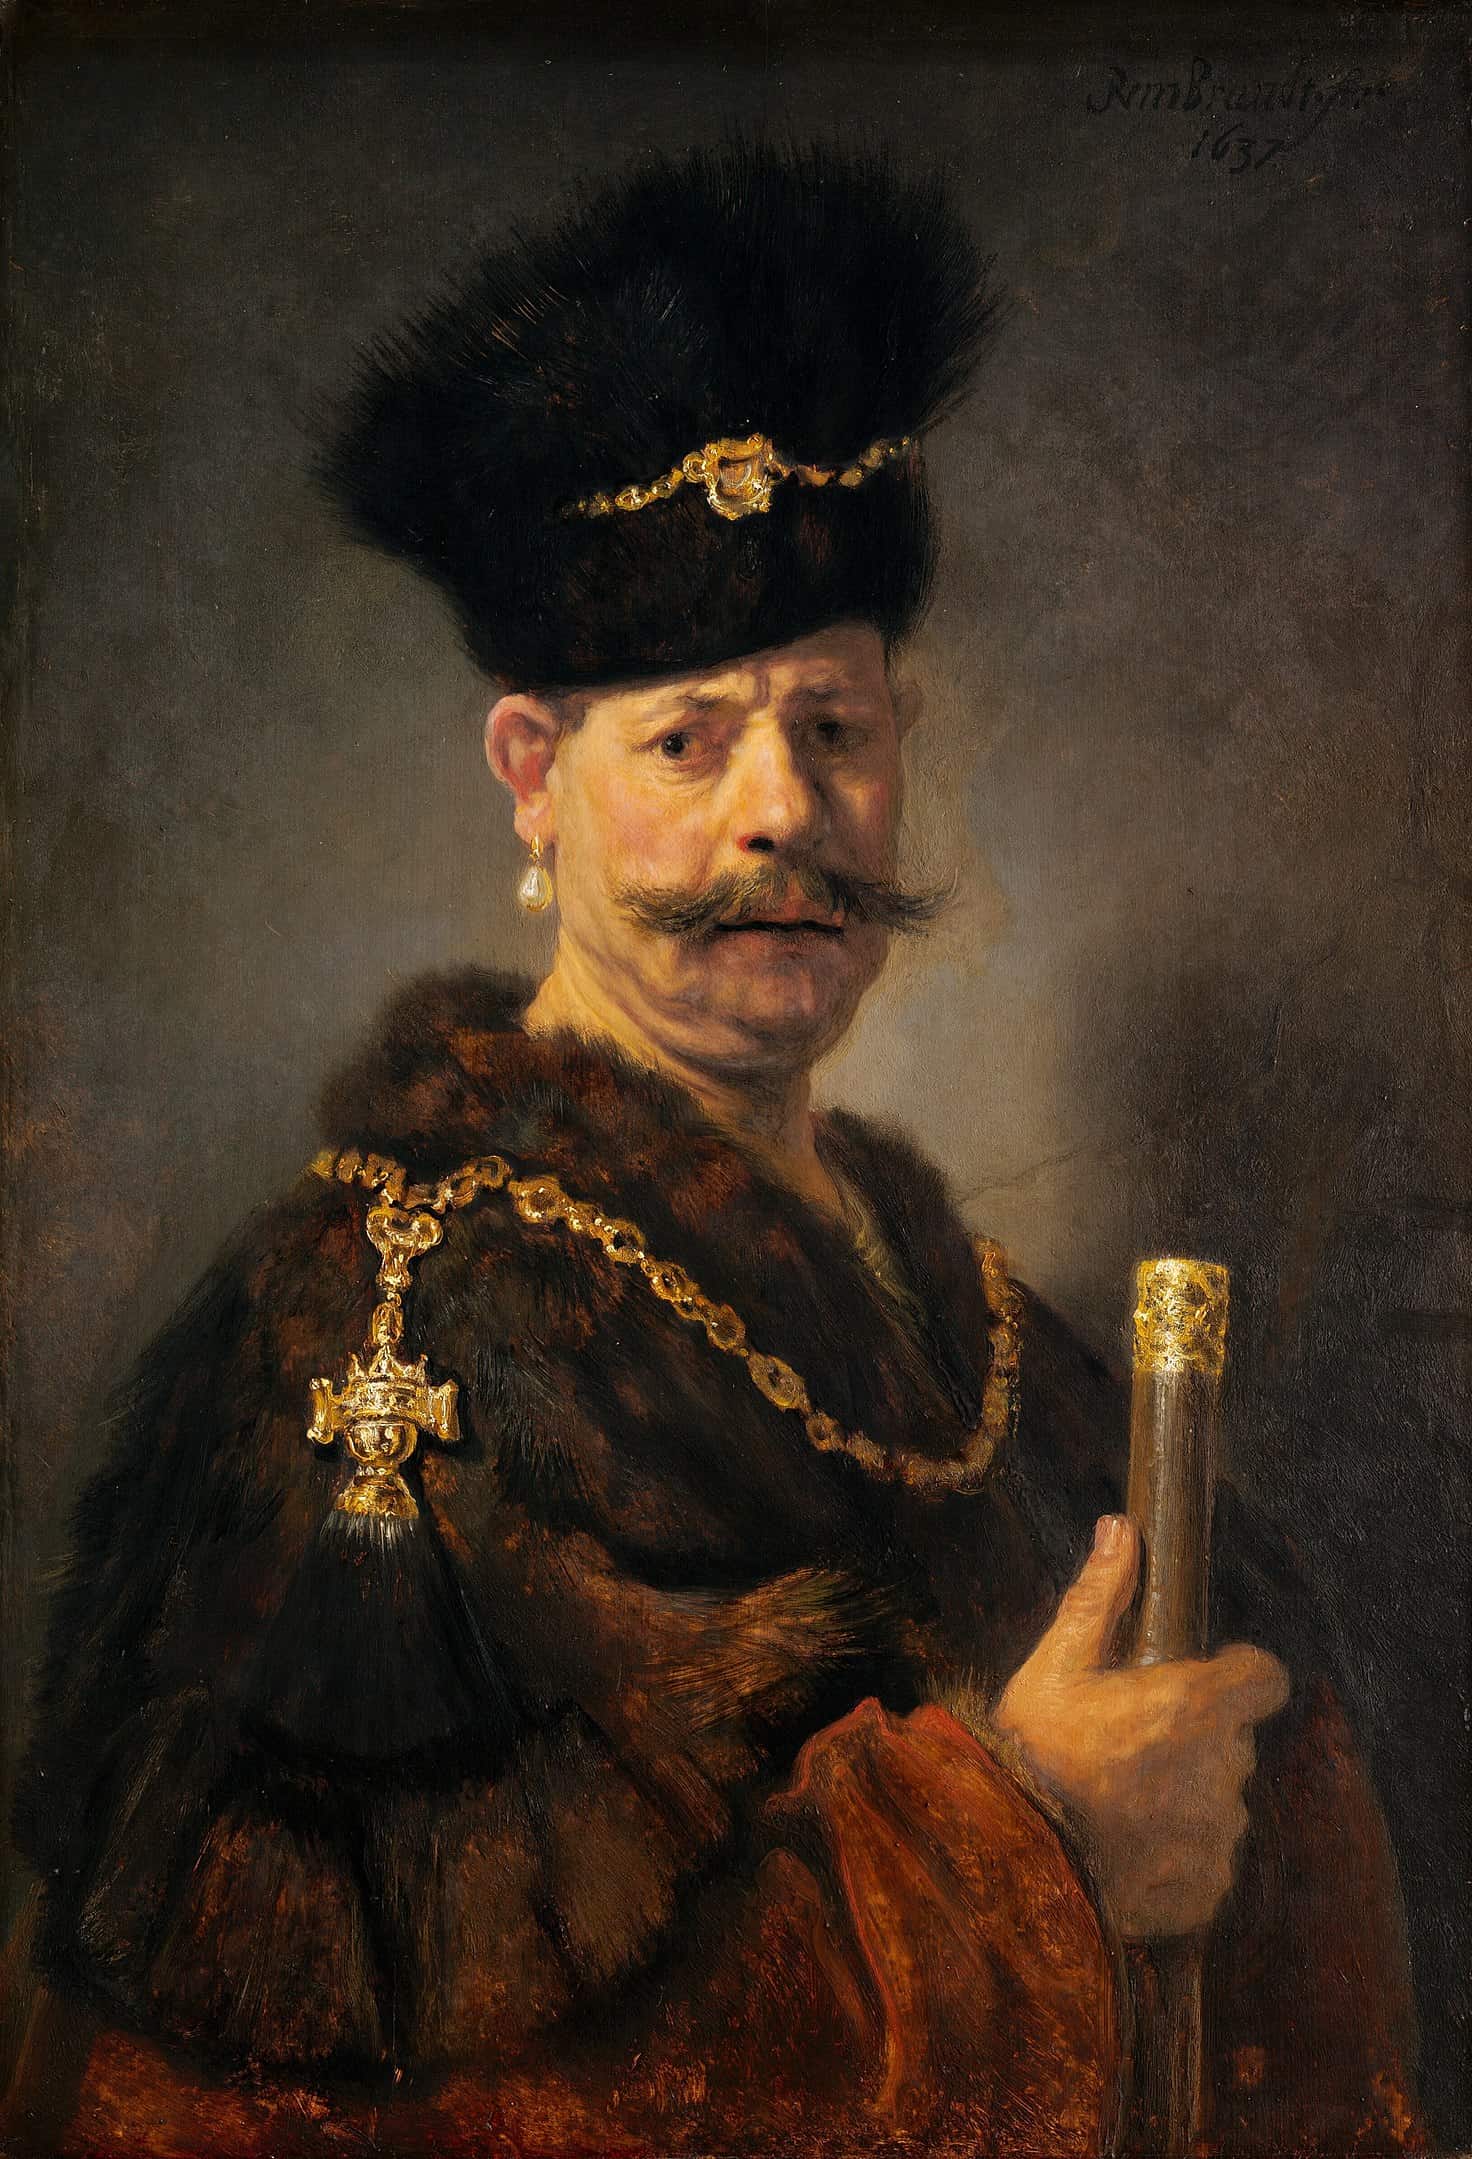 Rembrandt lighting in his portraits